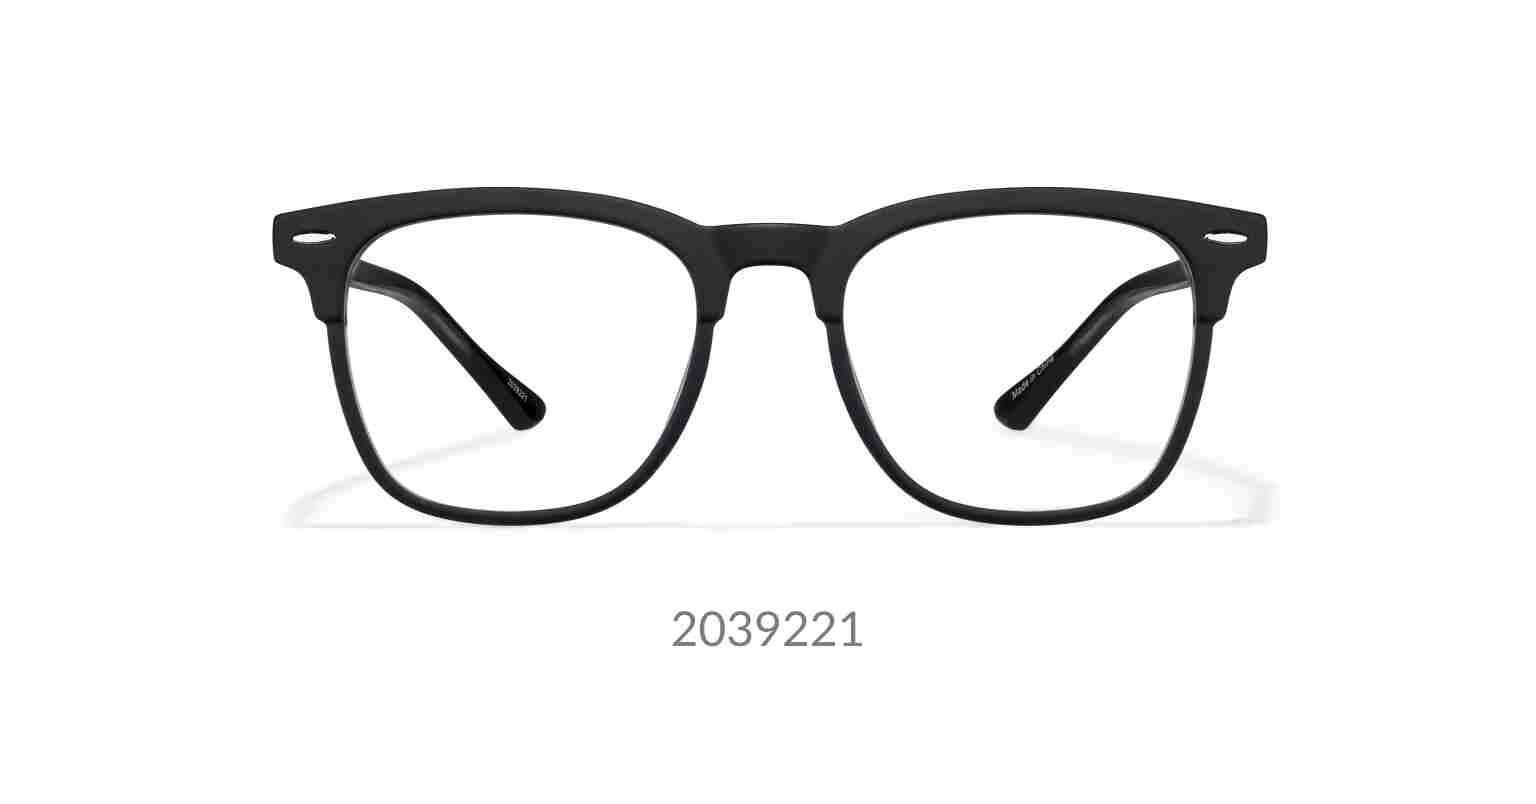 Image of zenni remakes bering kids browline glasses #2039221 against a white background.